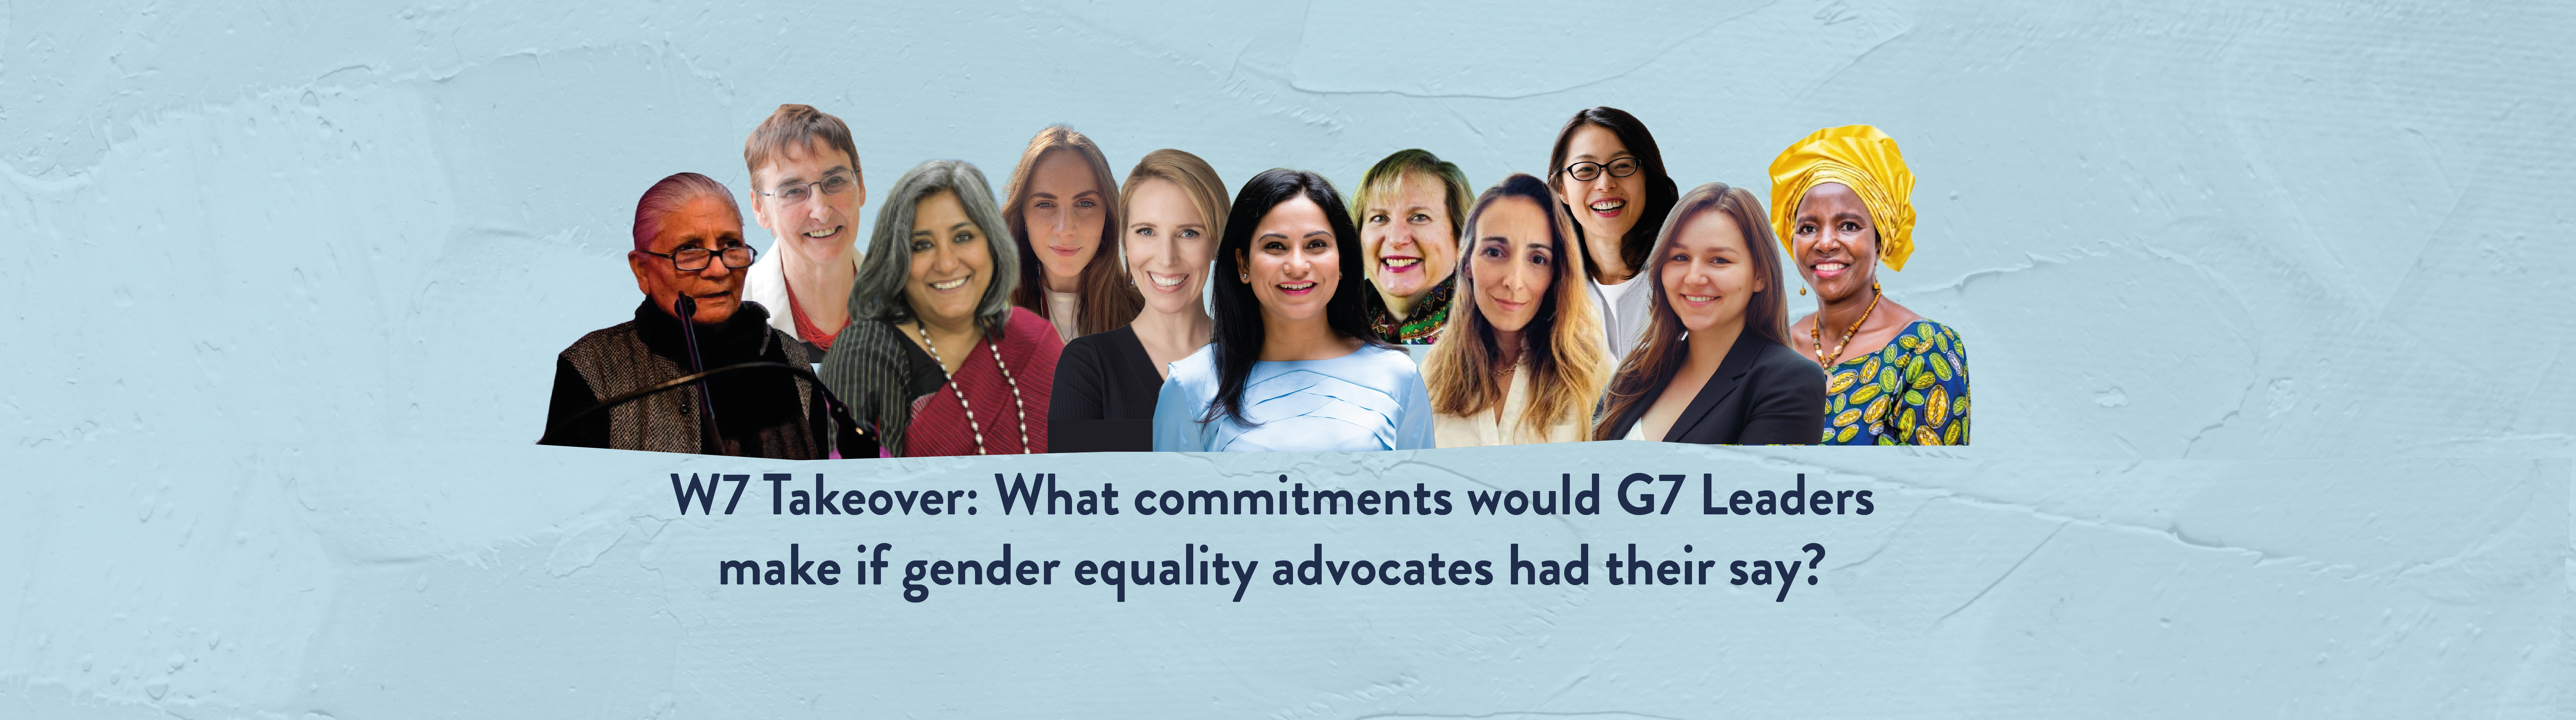 W7 Takeover: What commitments would G7 Leaders make if gender equality advocates had their say?